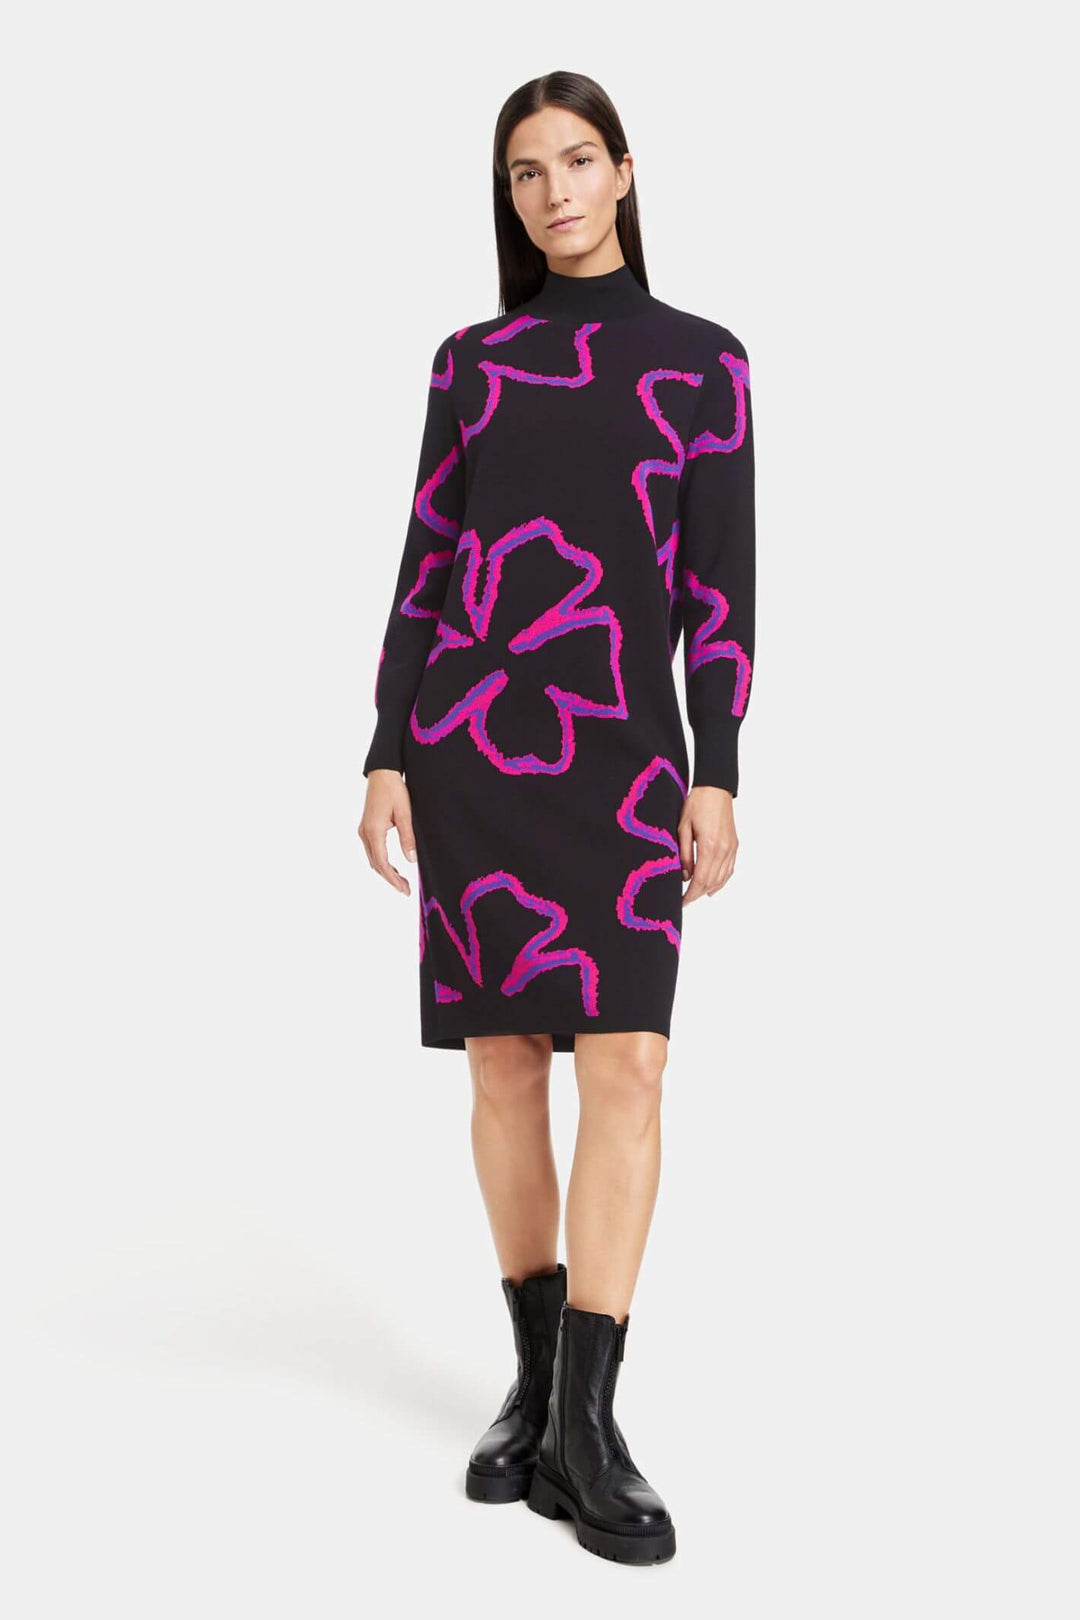 Gerry Weber 280049 Black & Pink Abstract Floral Print Sweater Dress